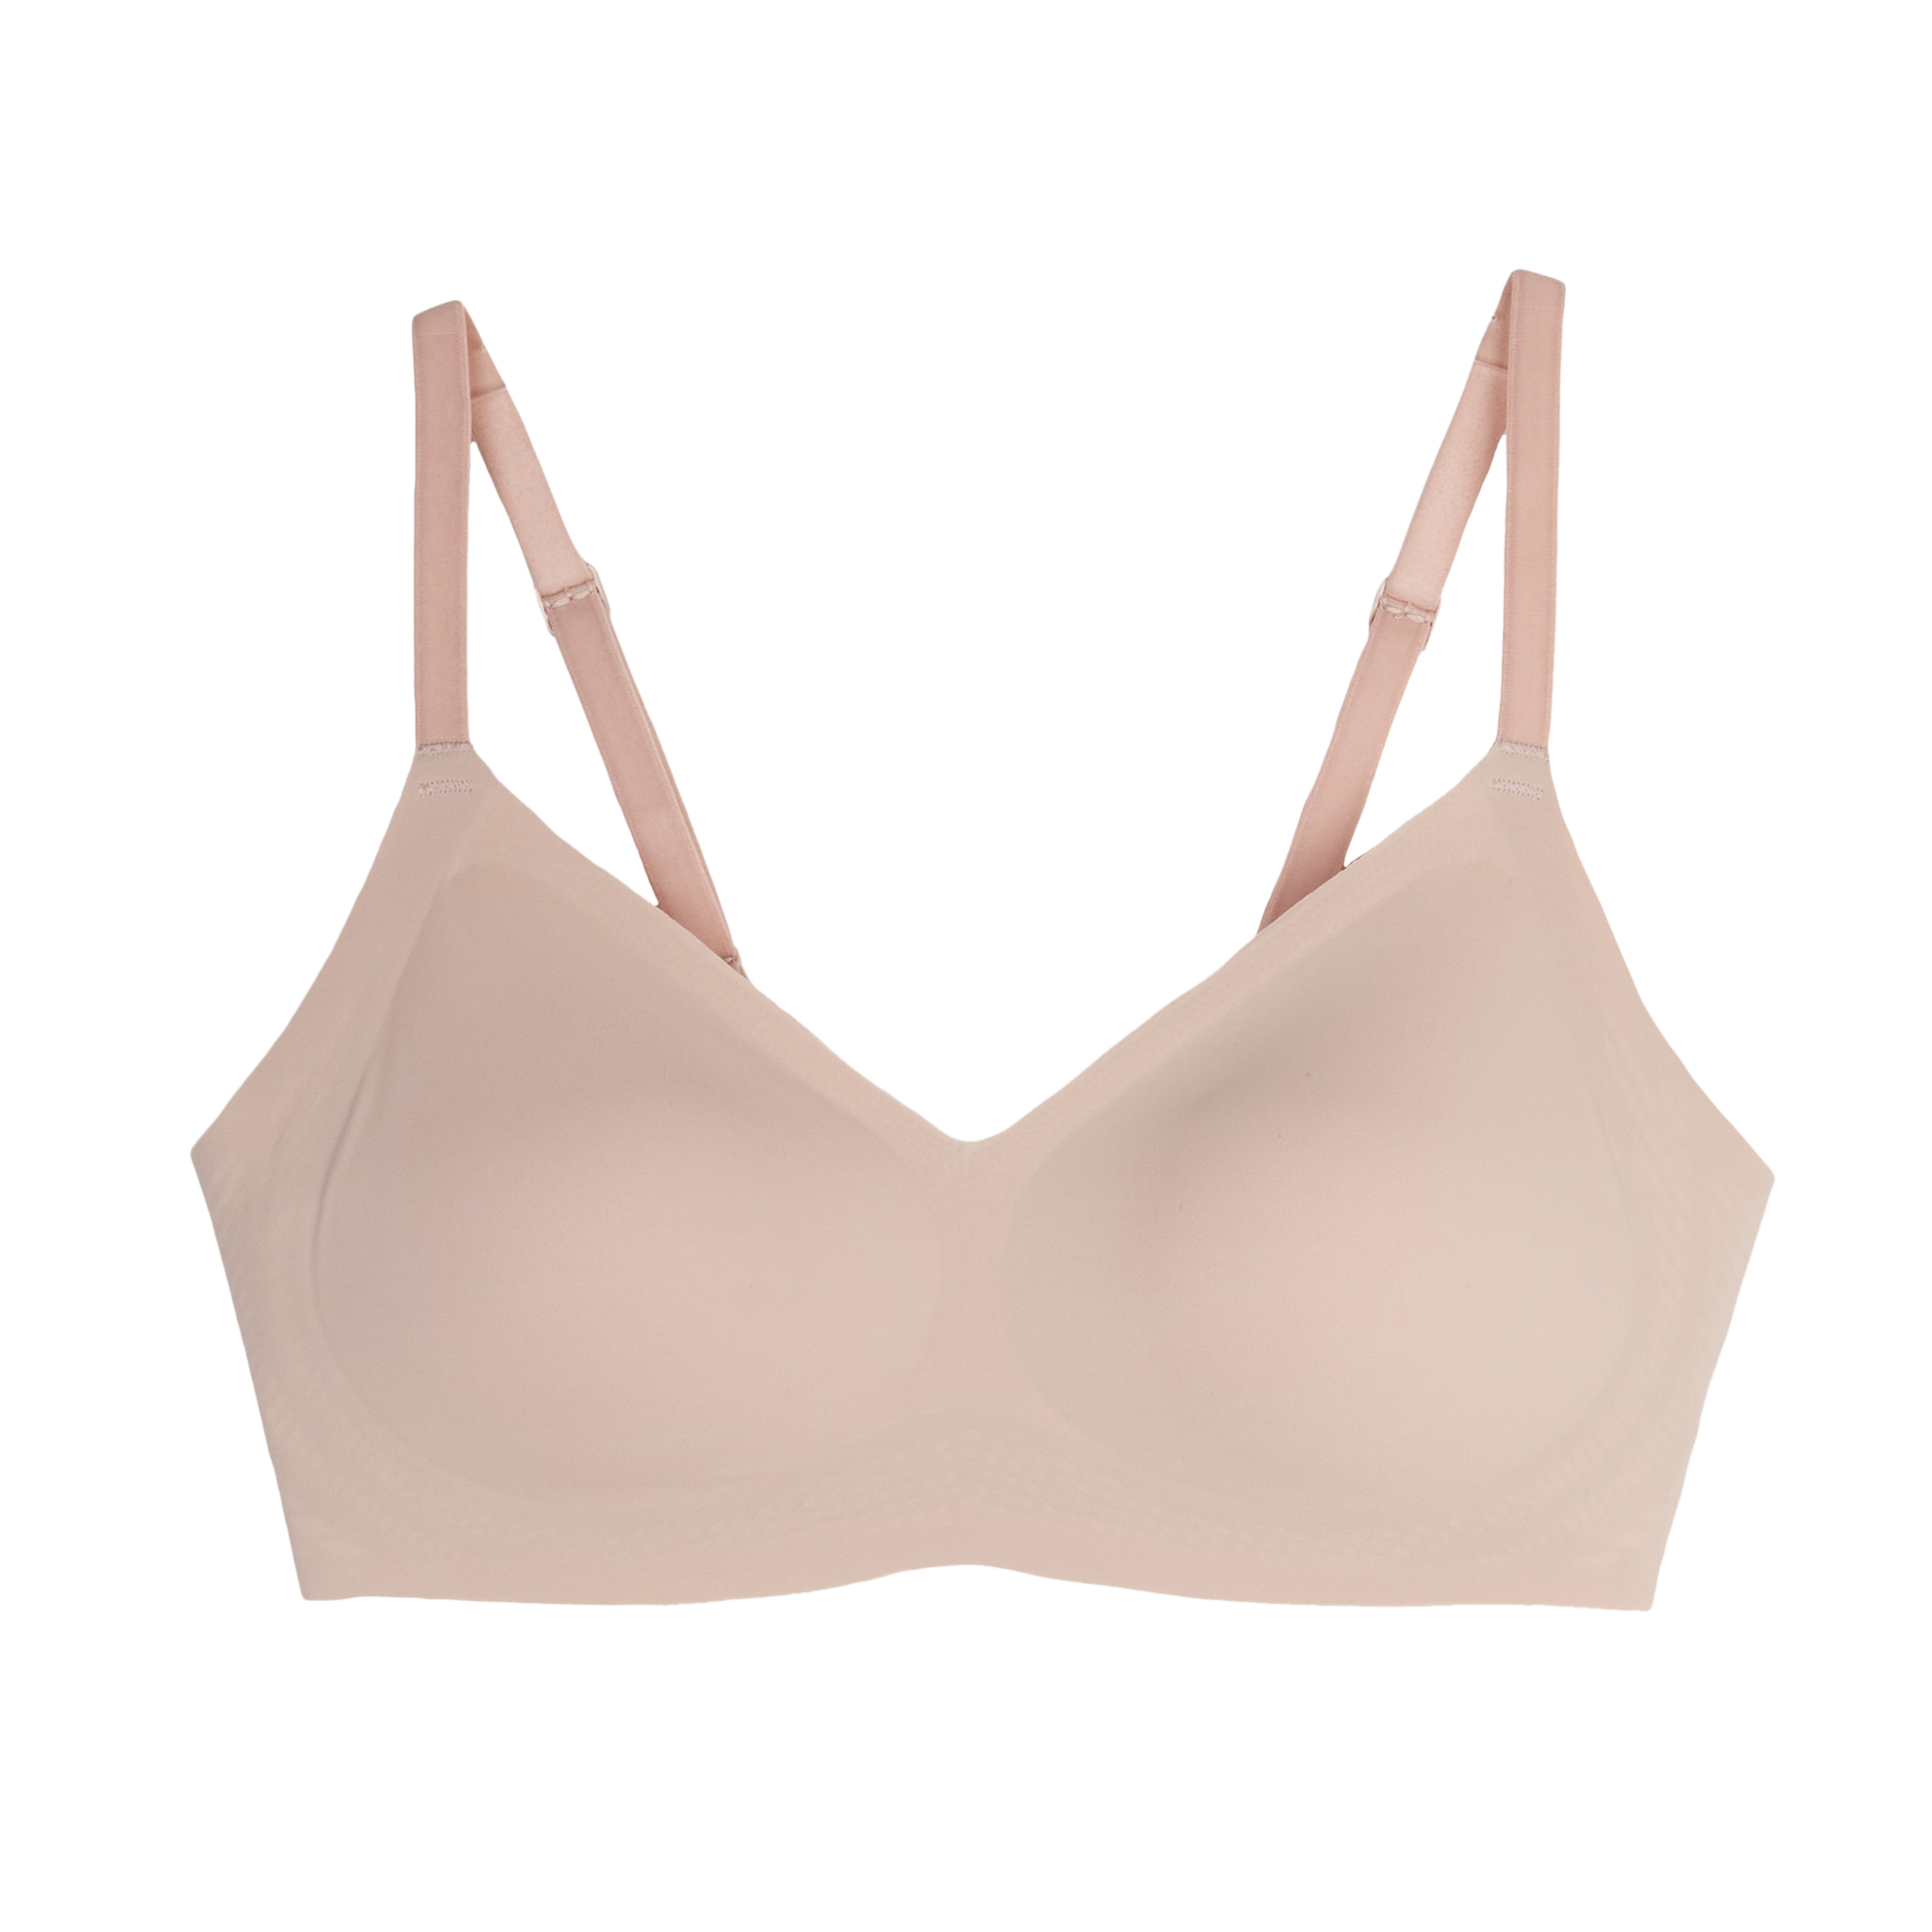 Replying to @AM TLDR; @shopvitality 's bras are SO supportive while al